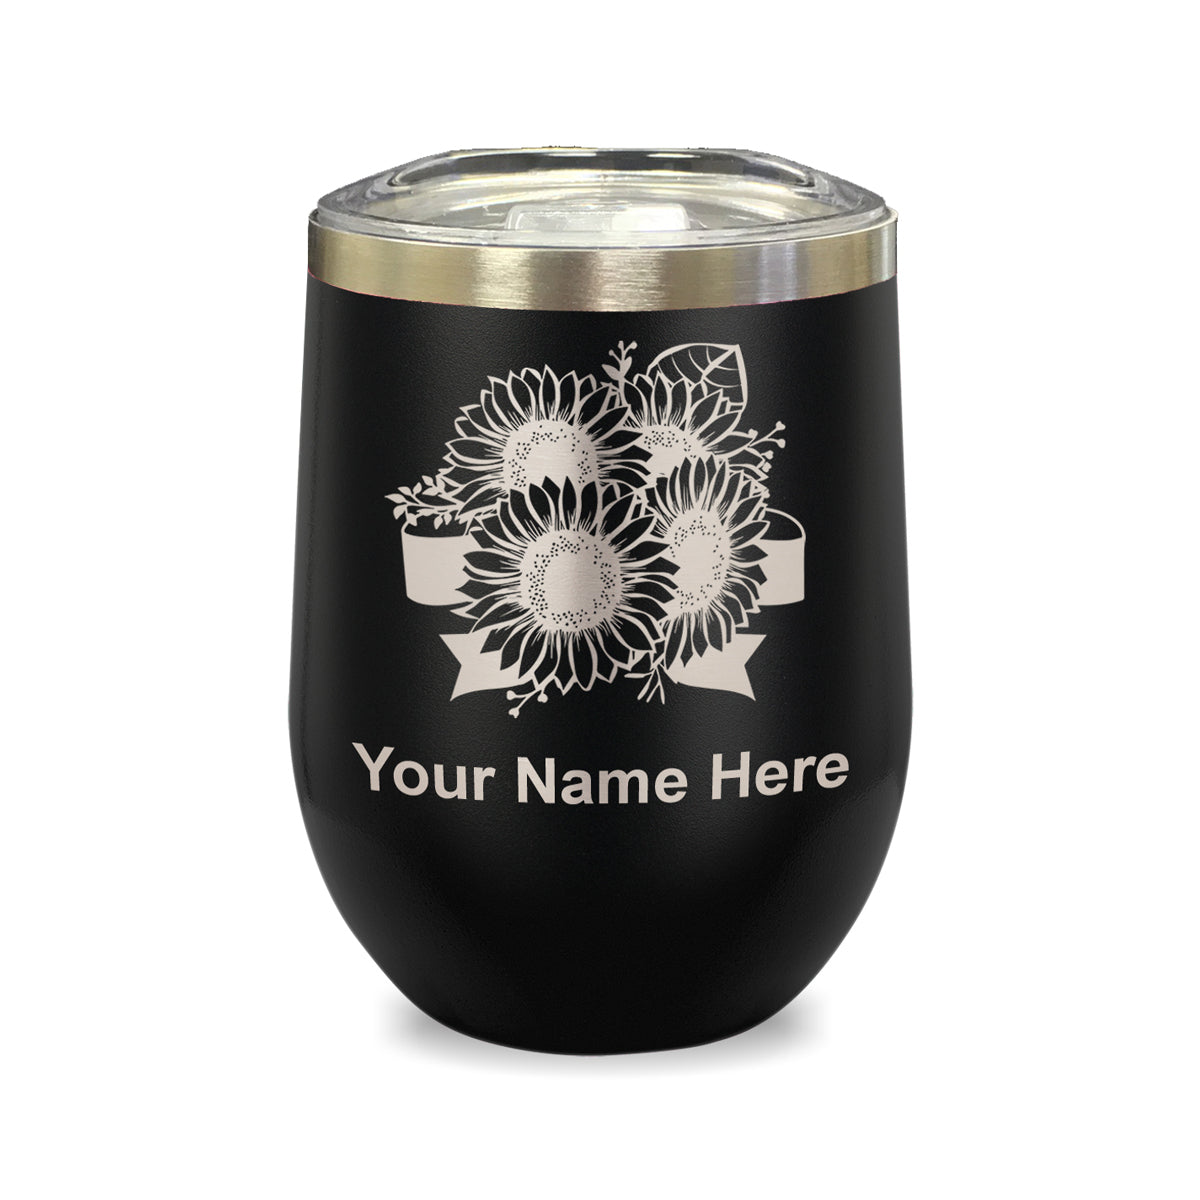 LaserGram Double Wall Stainless Steel Wine Glass, Sunflowers, Personalized Engraving Included